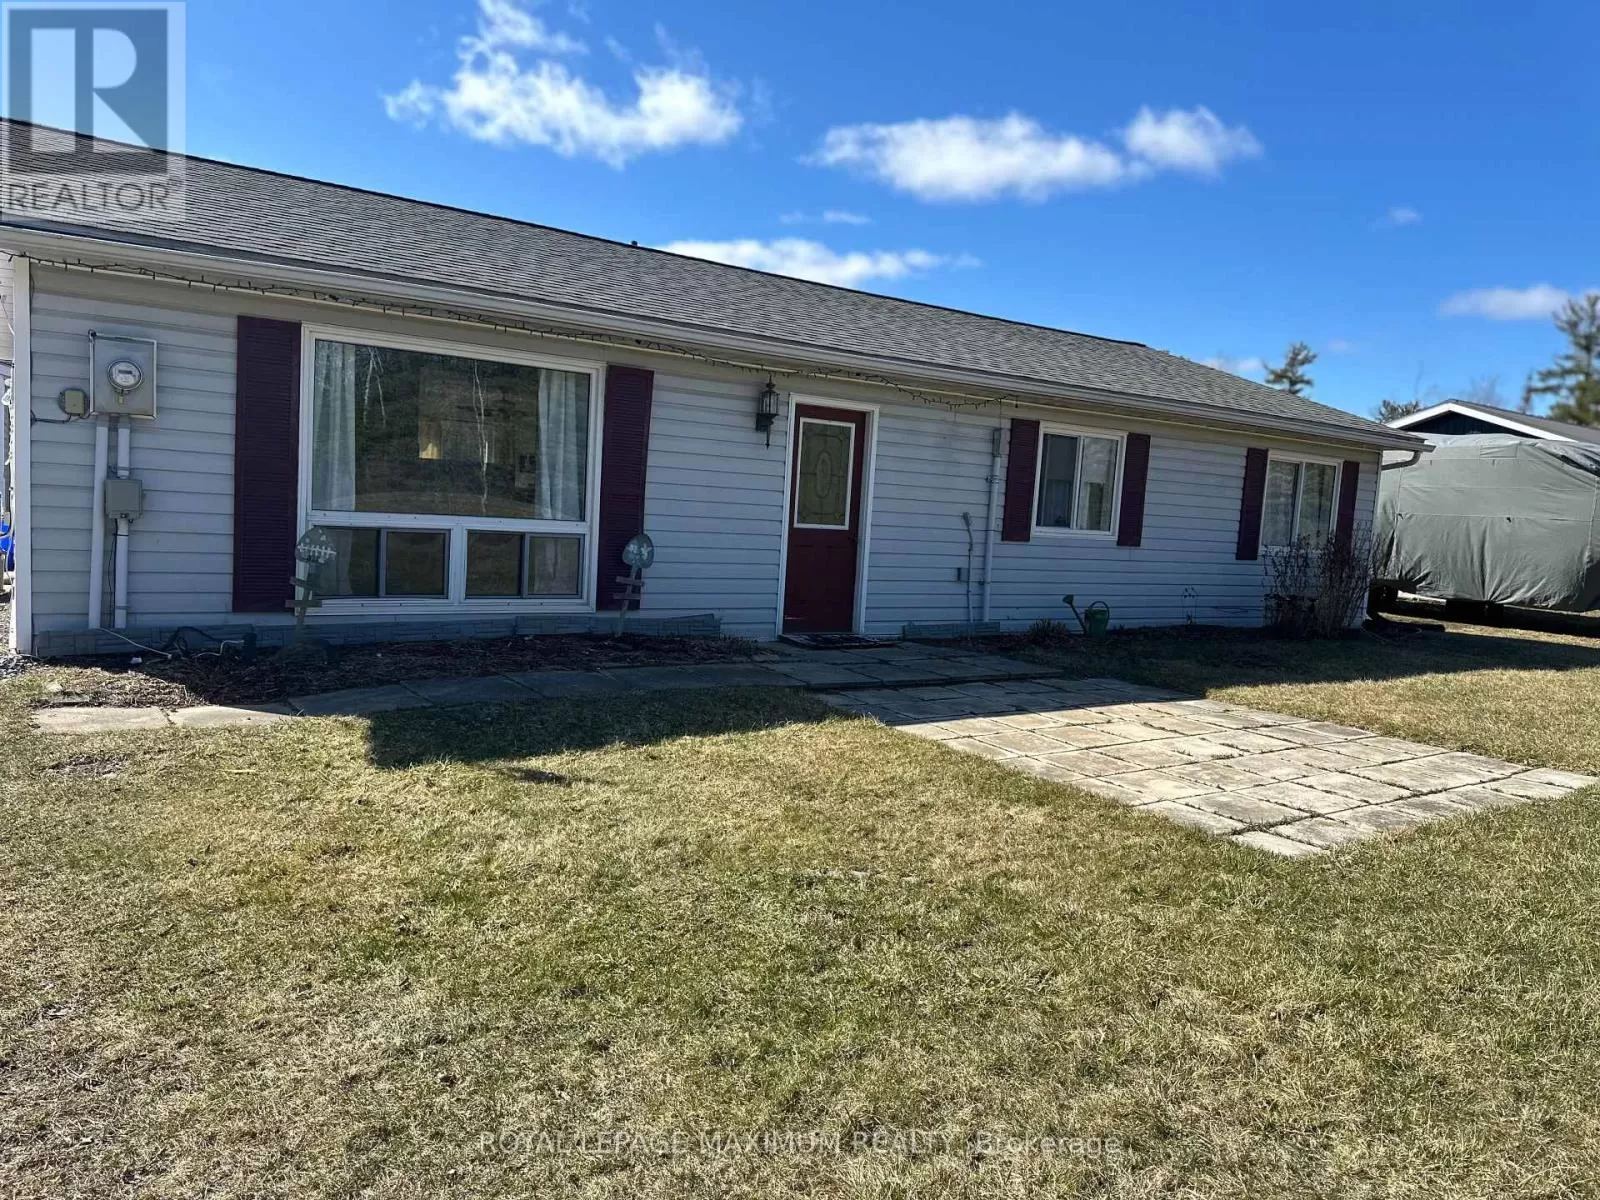 House for rent: 55 Marble Point Rd, Marmora and Lake, Ontario K0K 2M0